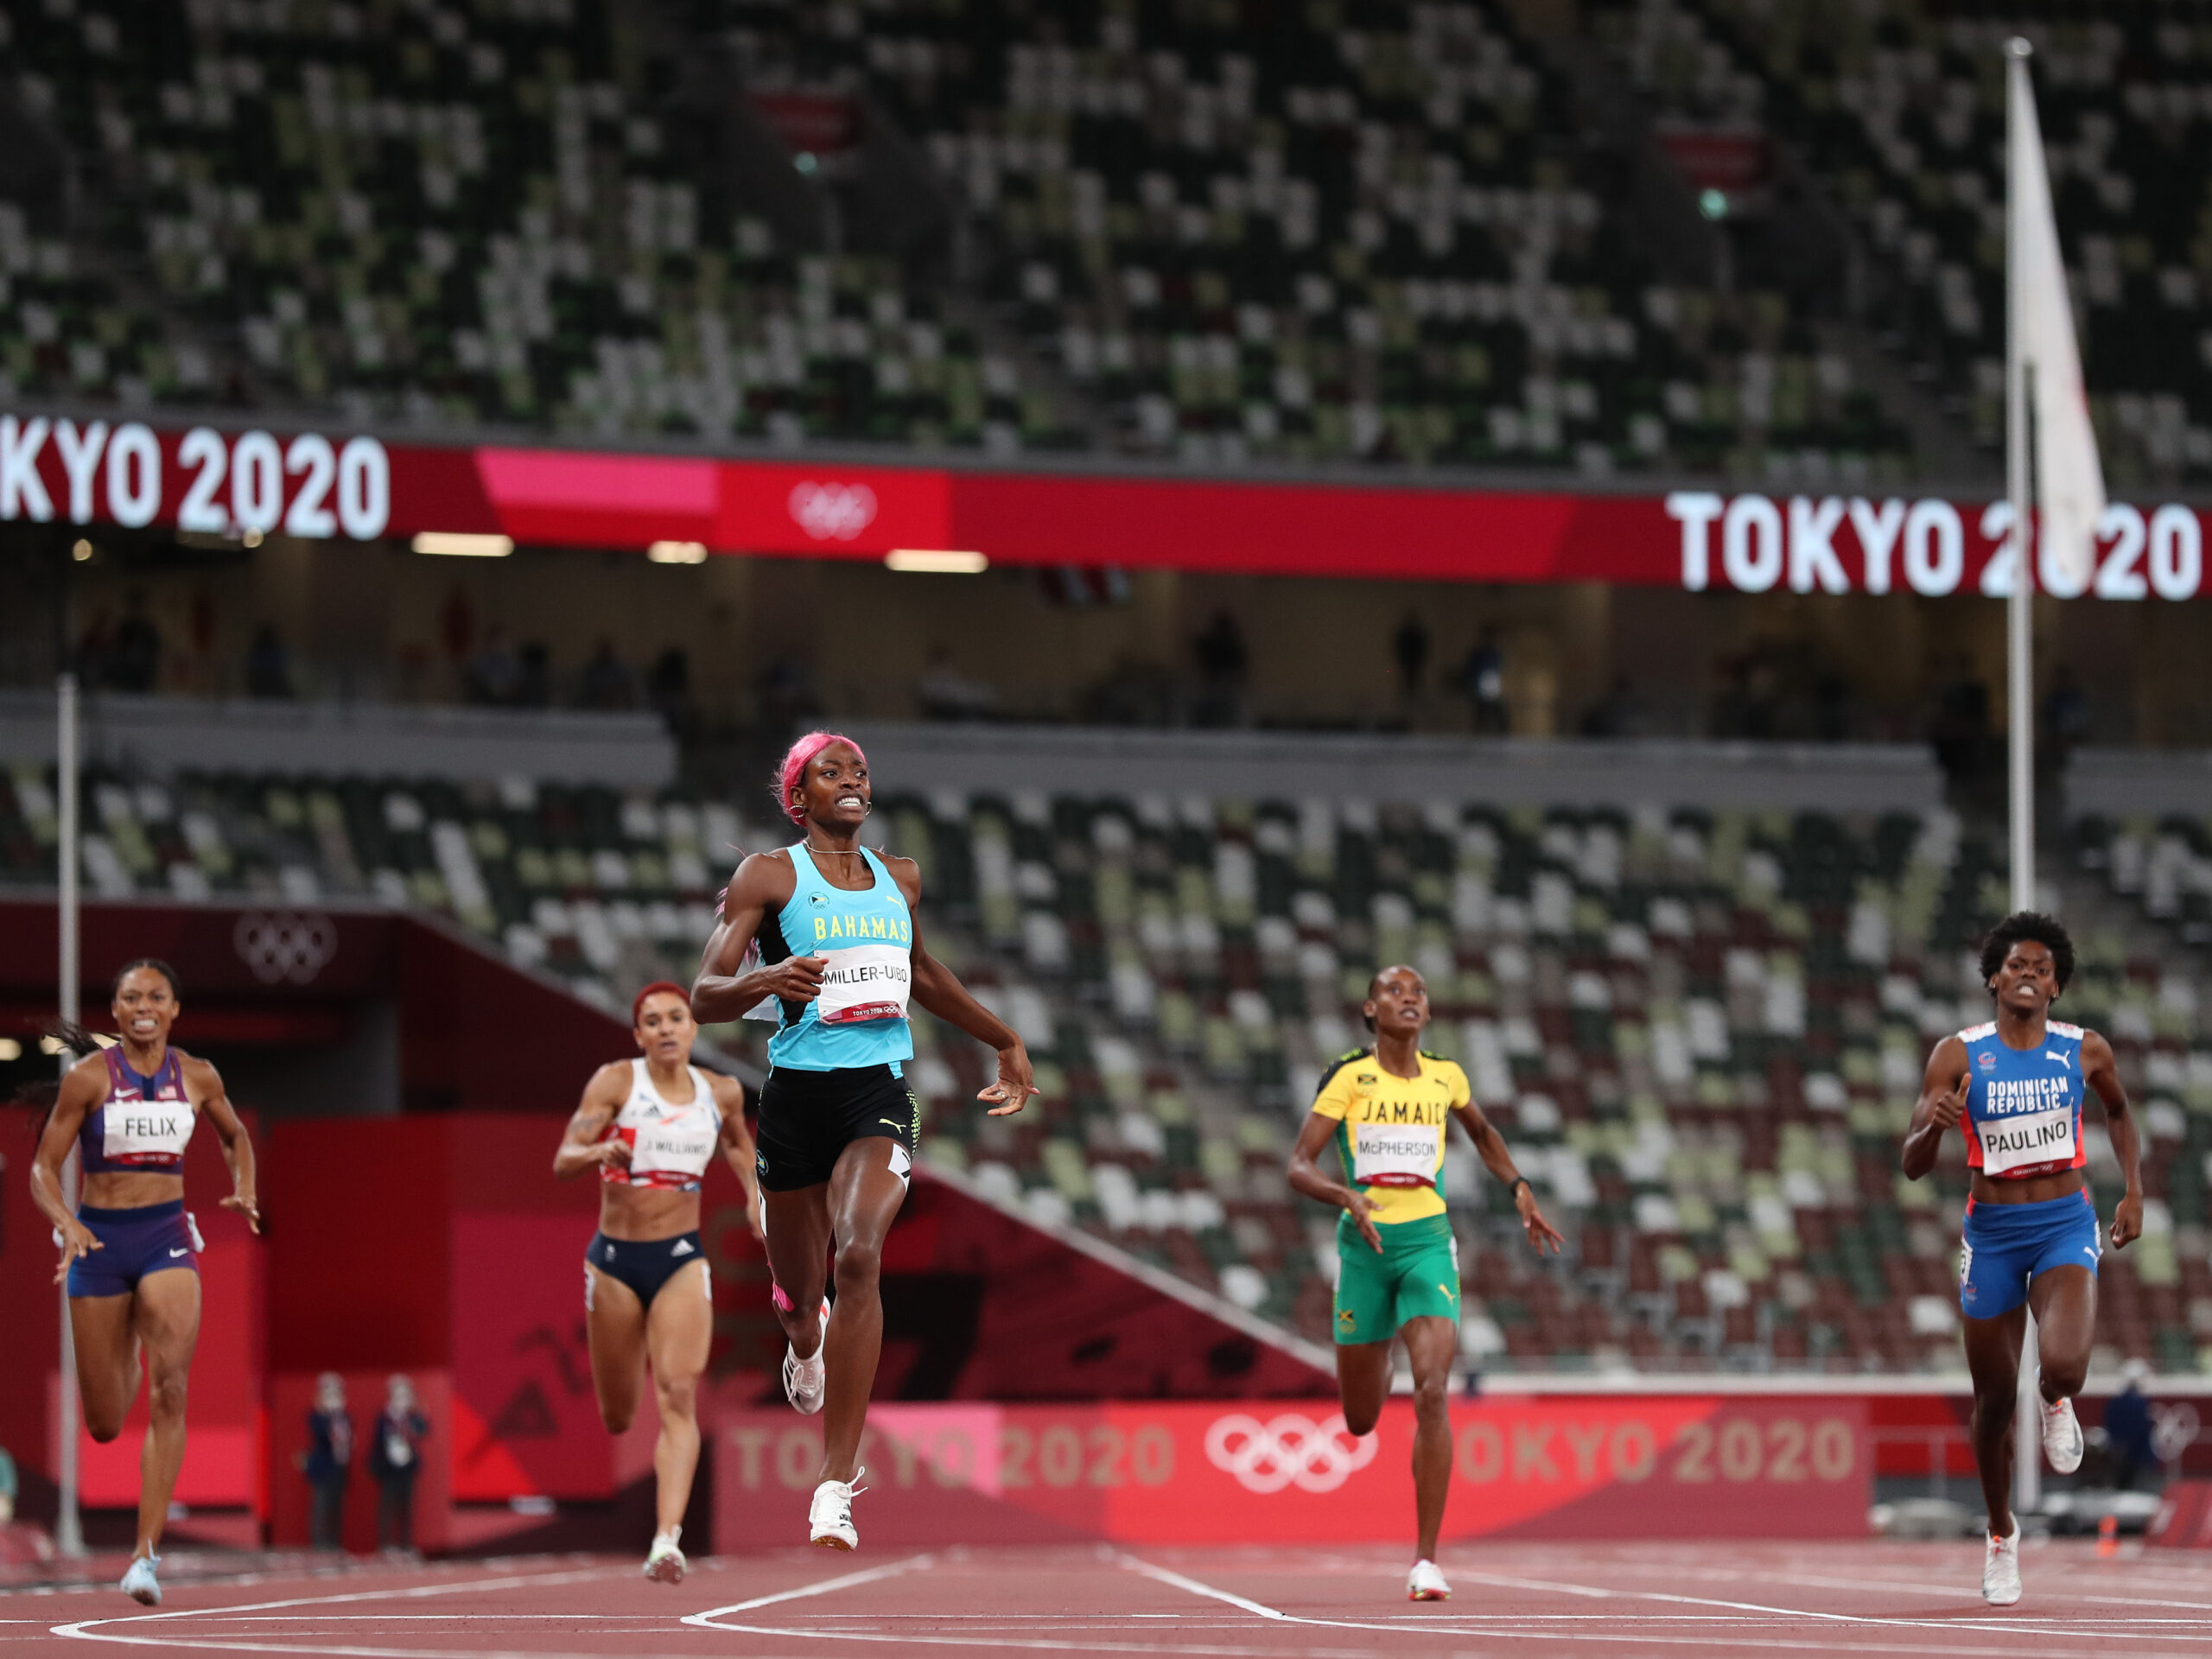 World Athletics will pay $50,000 to Olympic gold medalists in track and field events